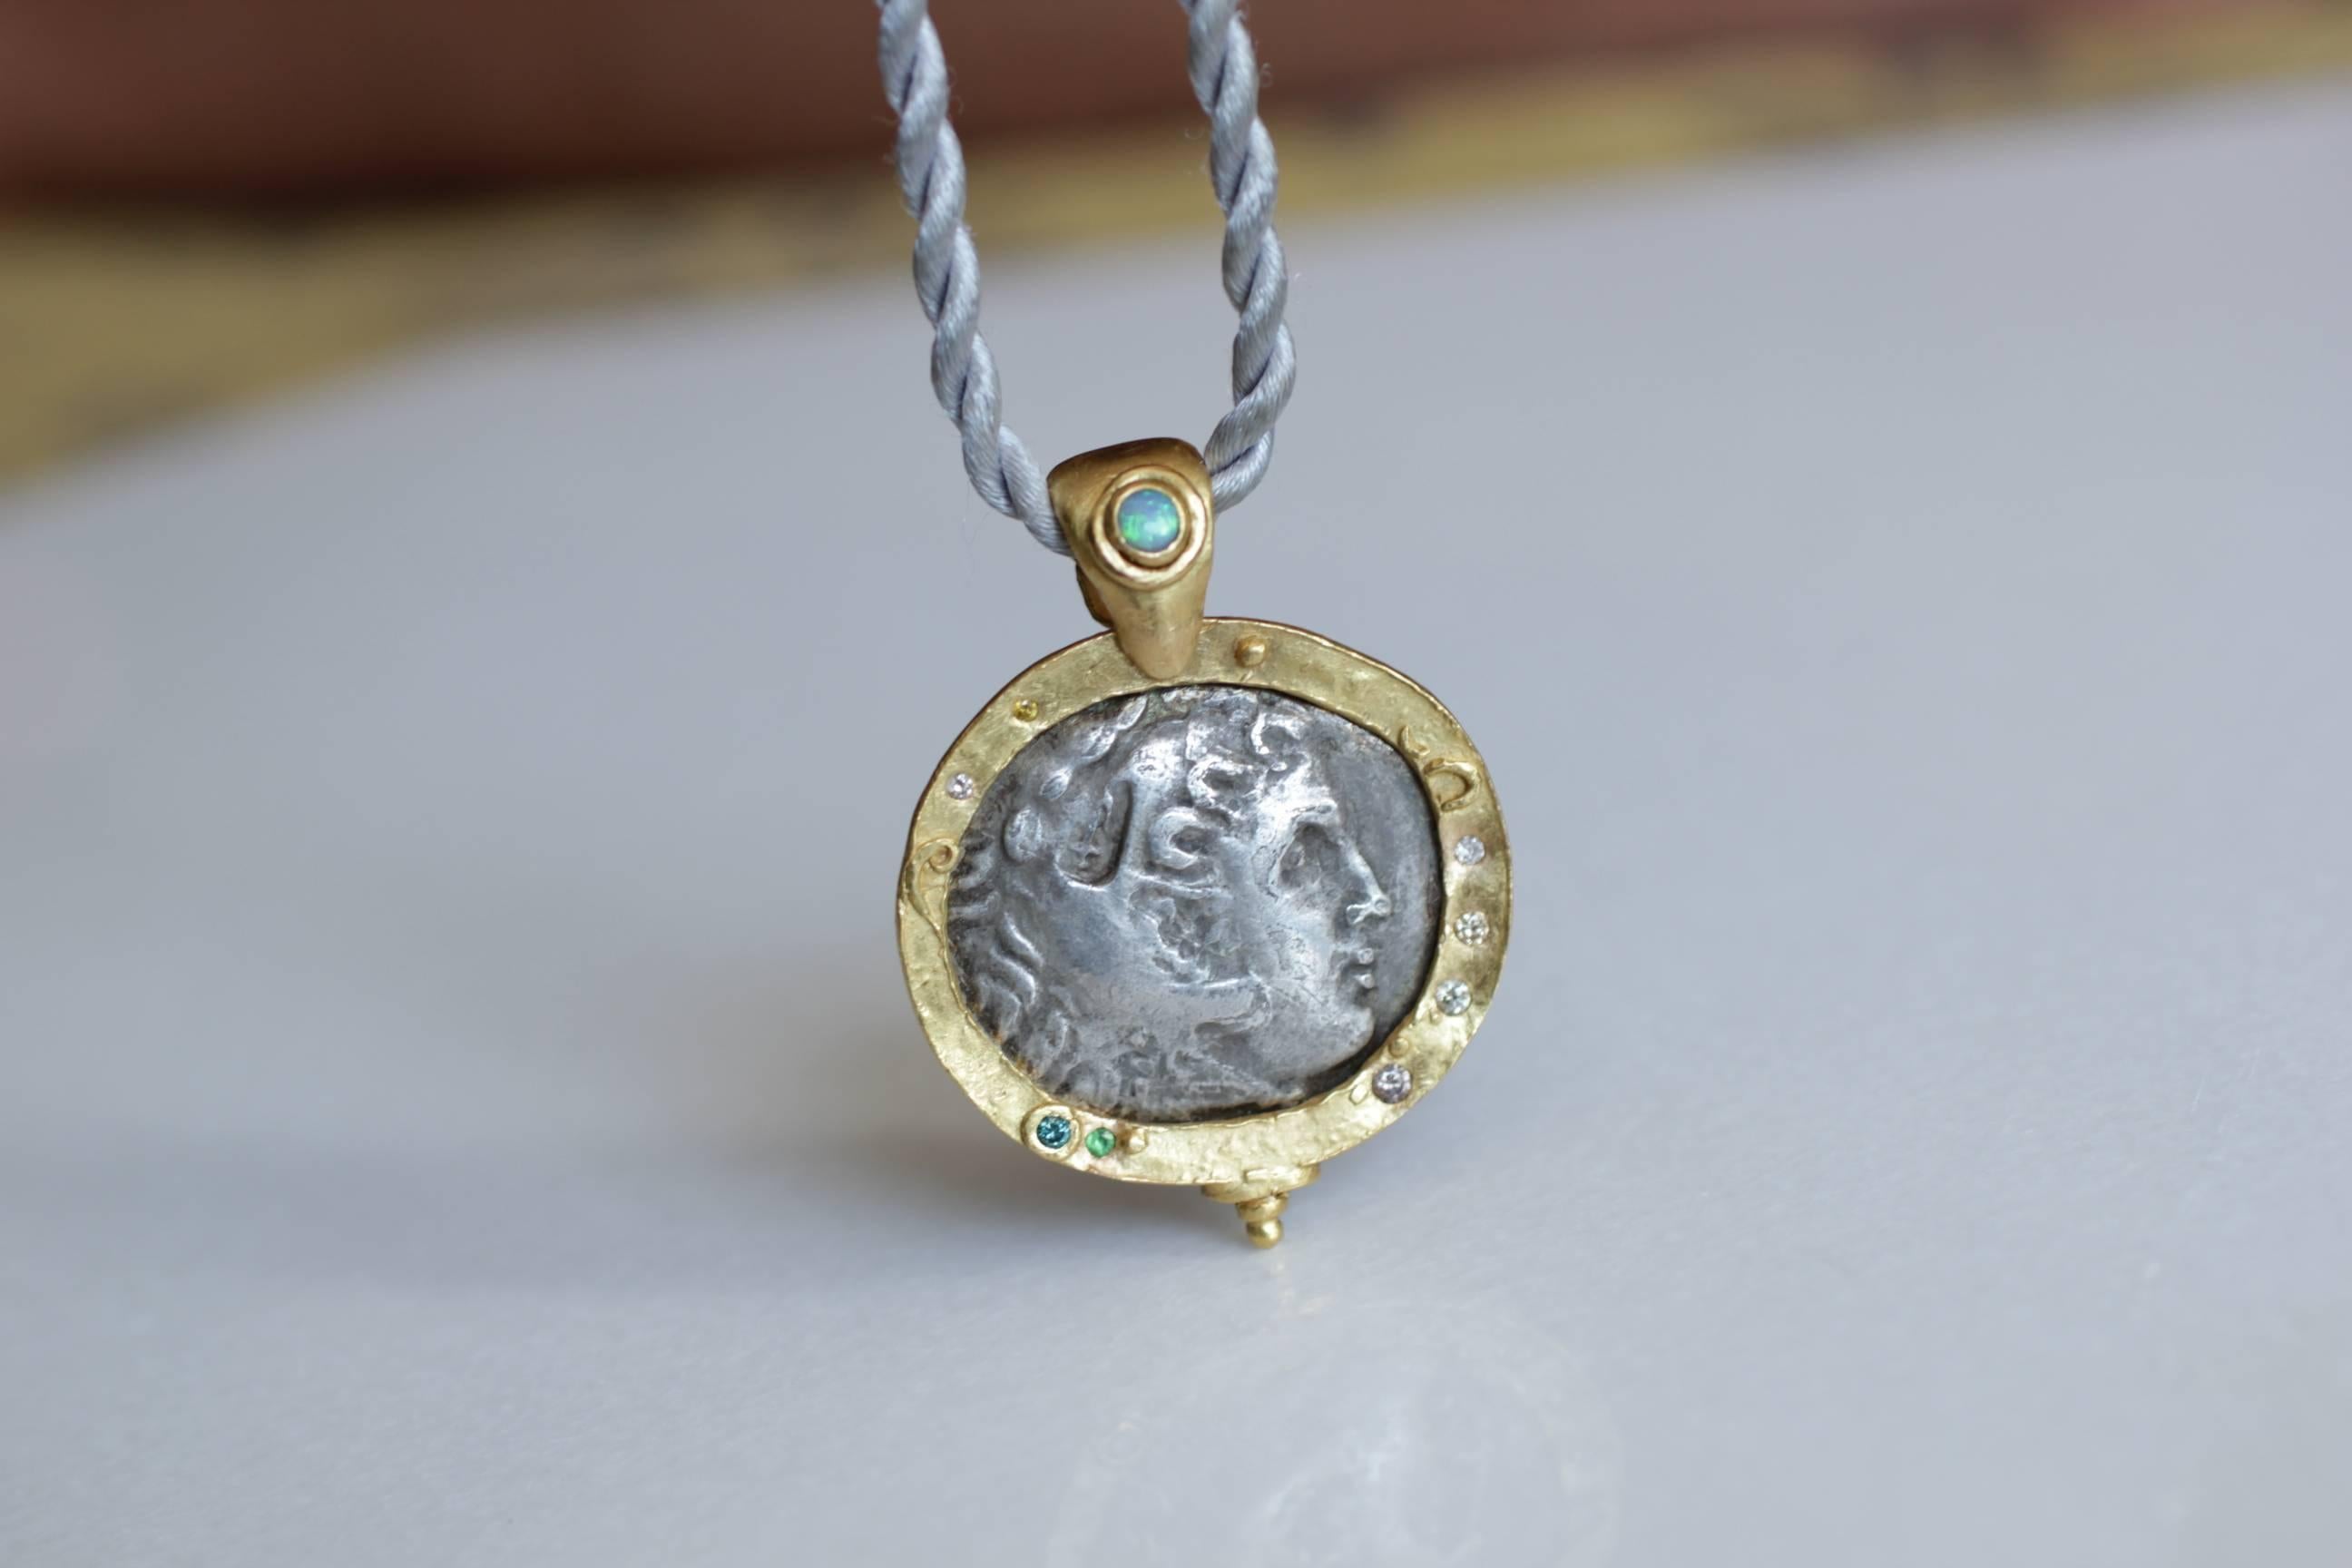 Antique silver Macedonian Coin Medallion Pendant Necklace. Large antique 3rd Cent BC Greek coin, set in 21k gold bezel, embellished with small diamonds and garnet accents. The Bail is highlighted with Lightning Ridge Opal, also set in a bezel.

The